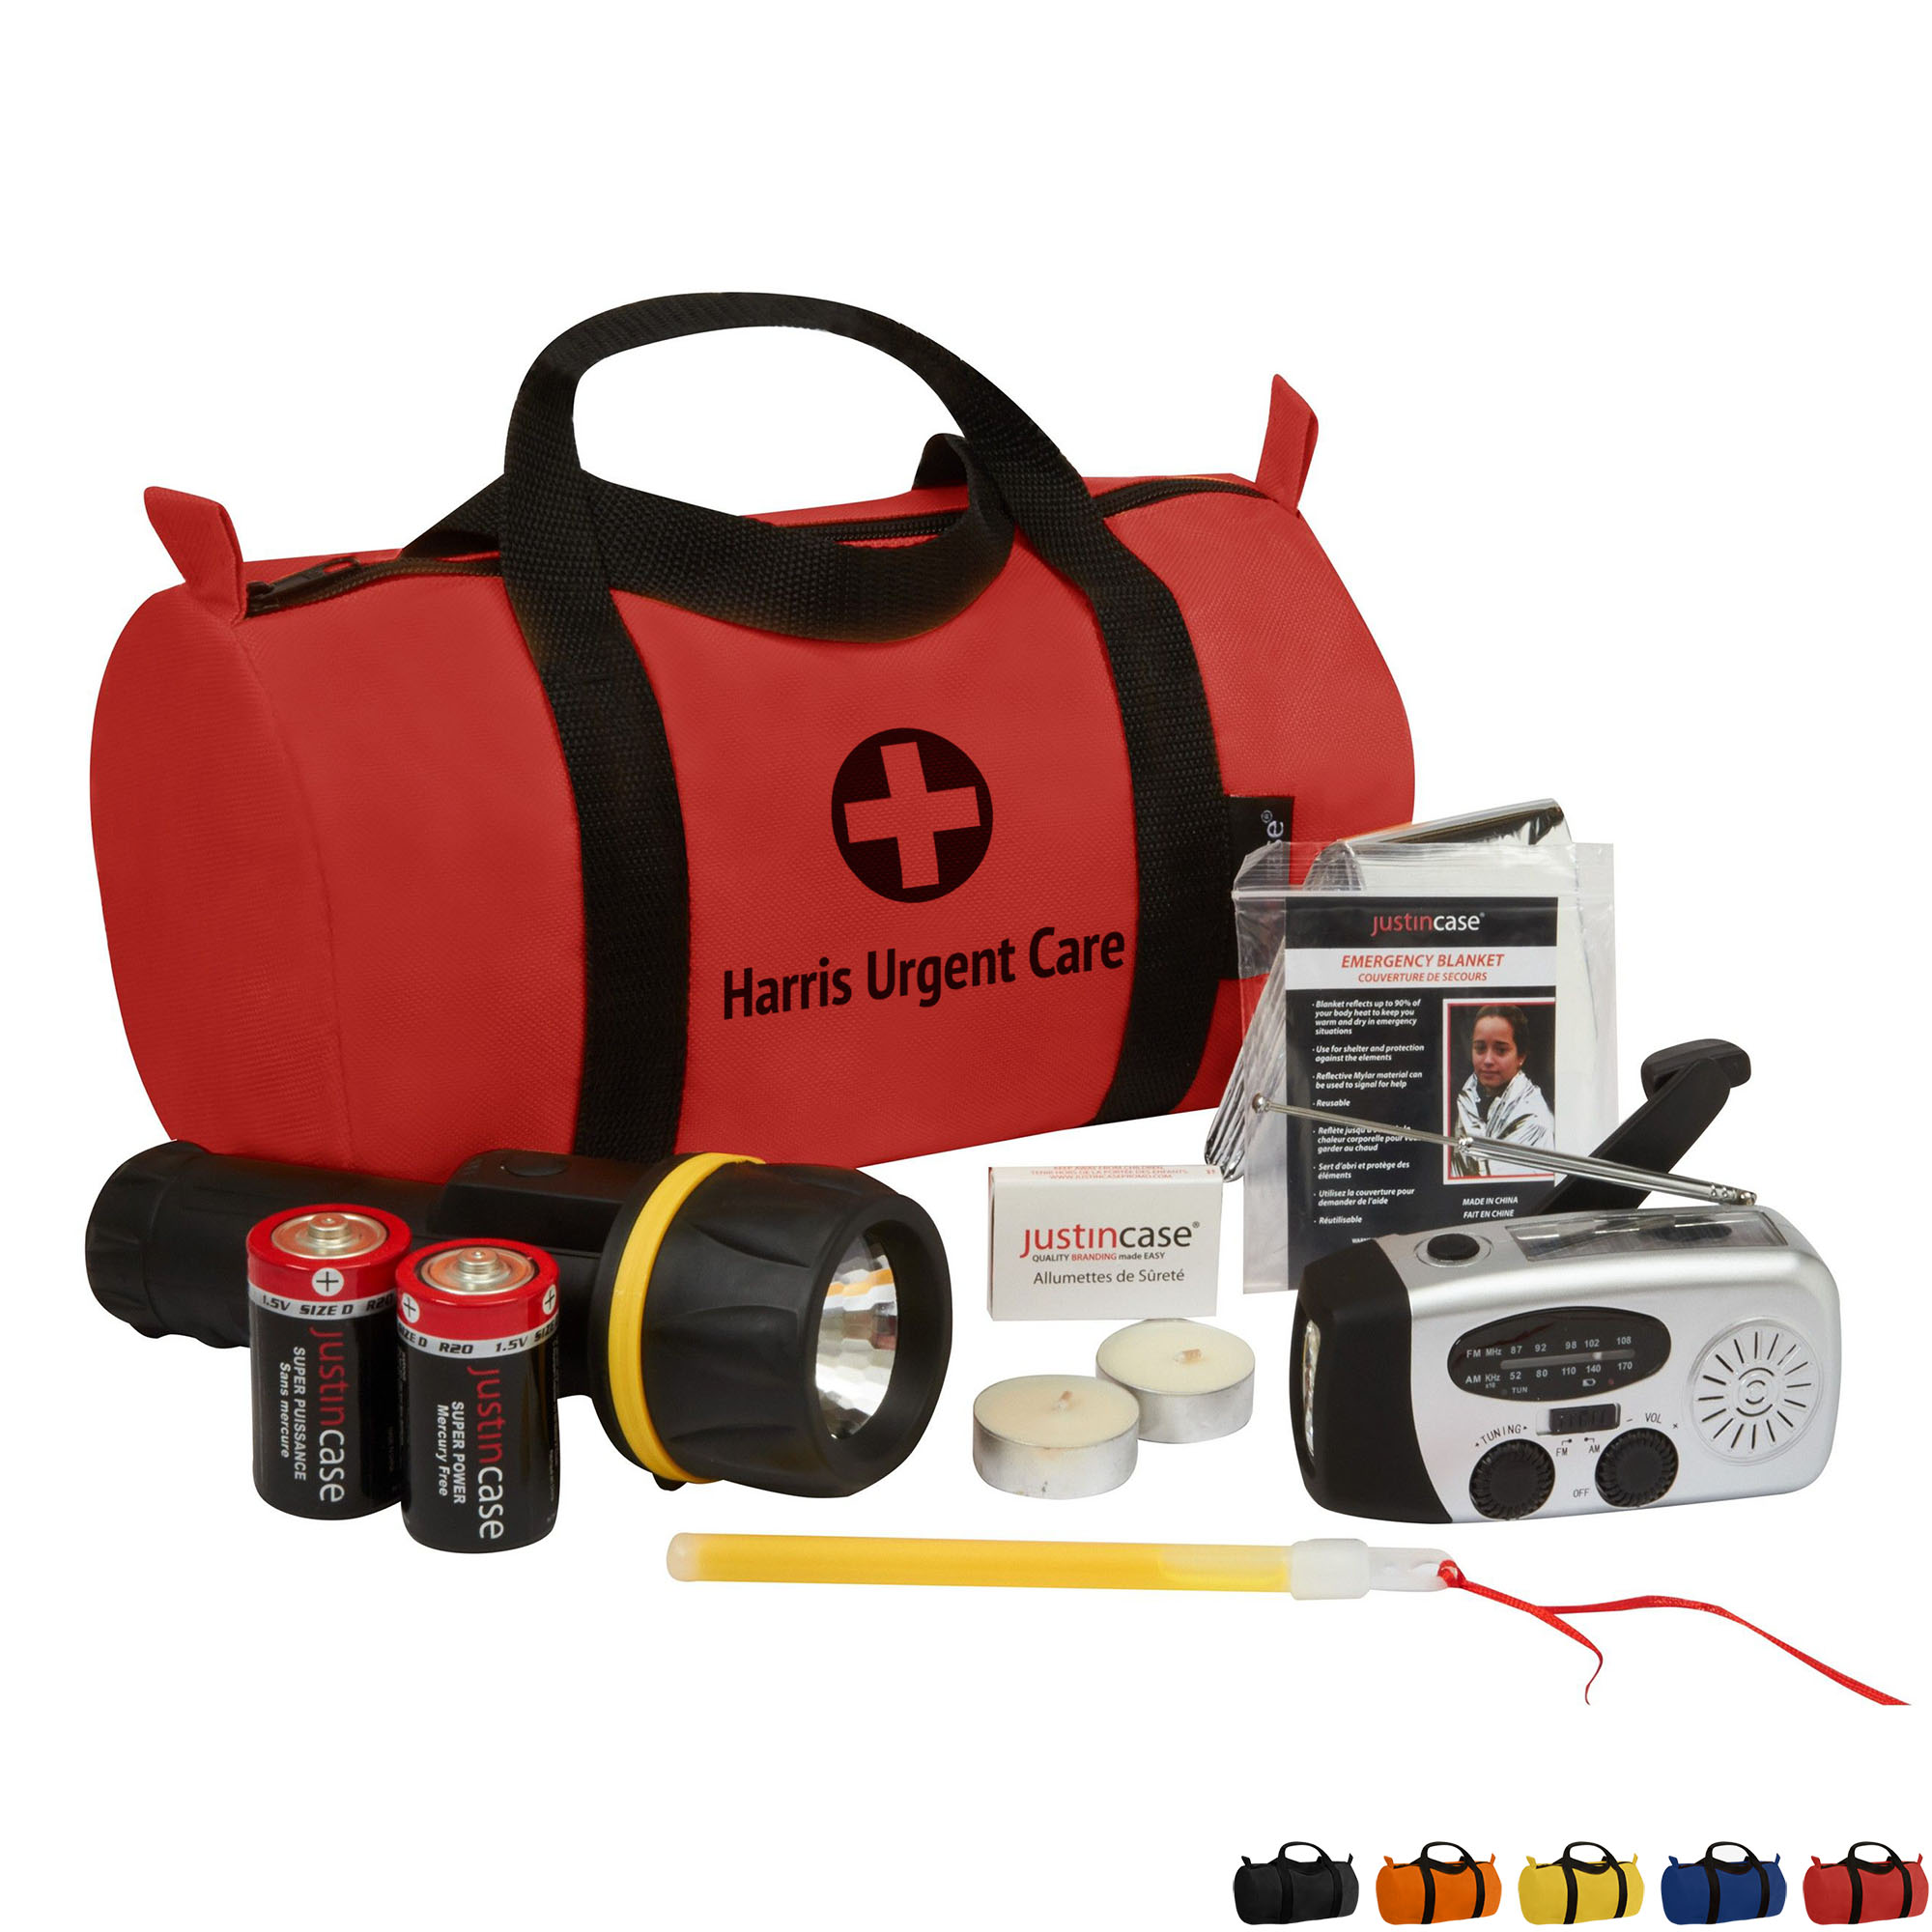 Promotional Survival Kits Custom Printed with Logo